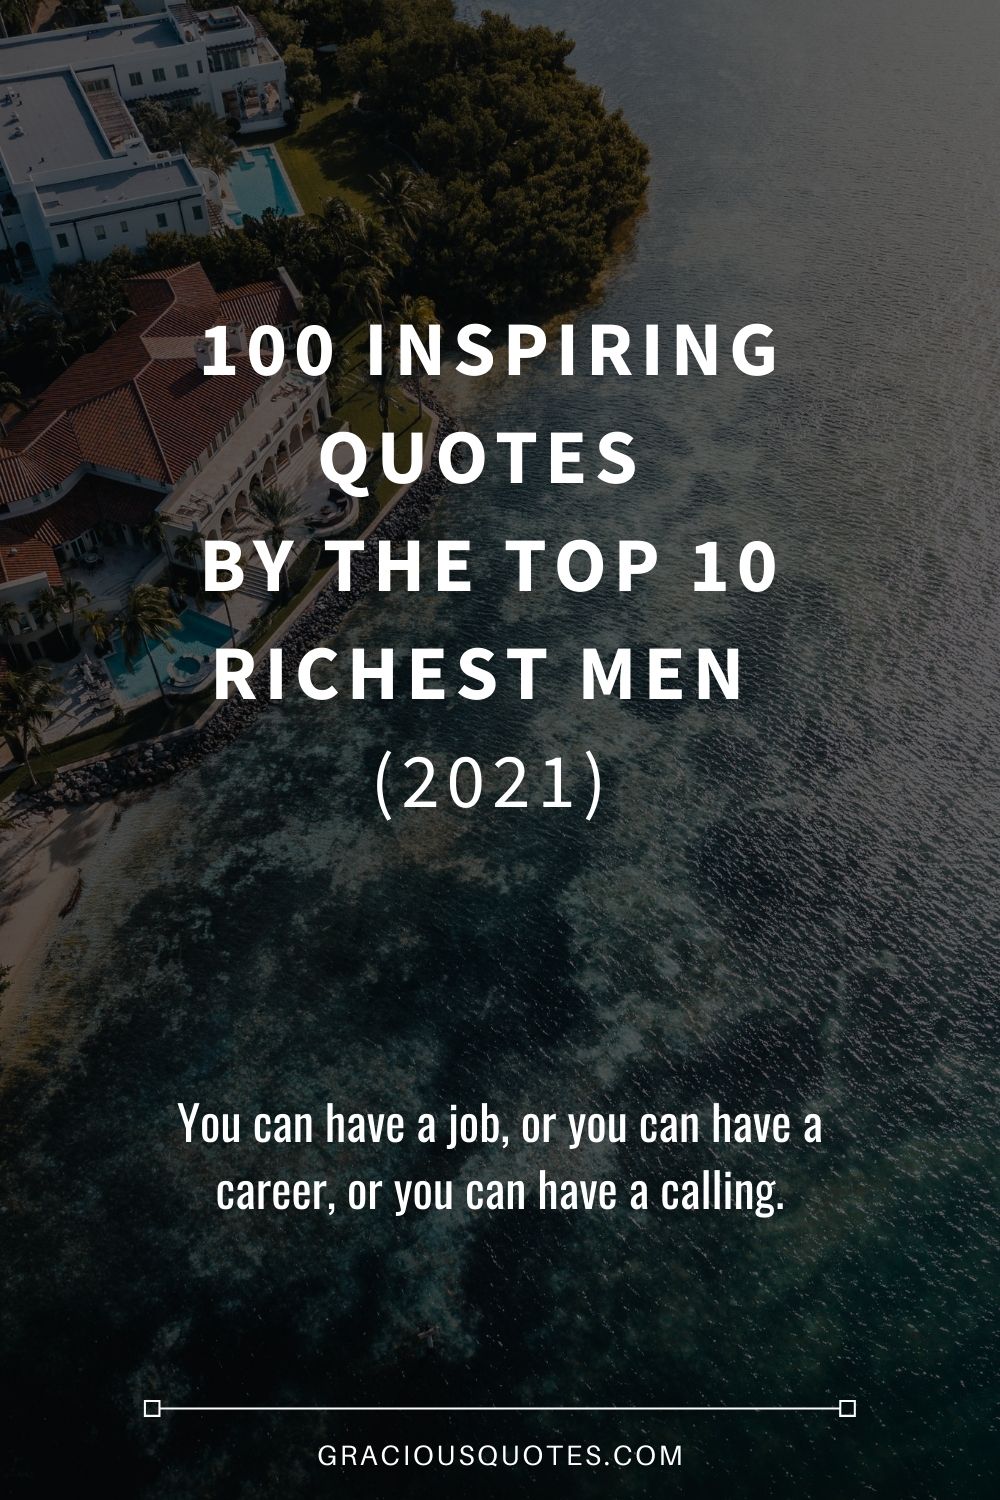 100 Inspiring Quotes By the Top 10 Richest Men (2021) - Gracious Quotes